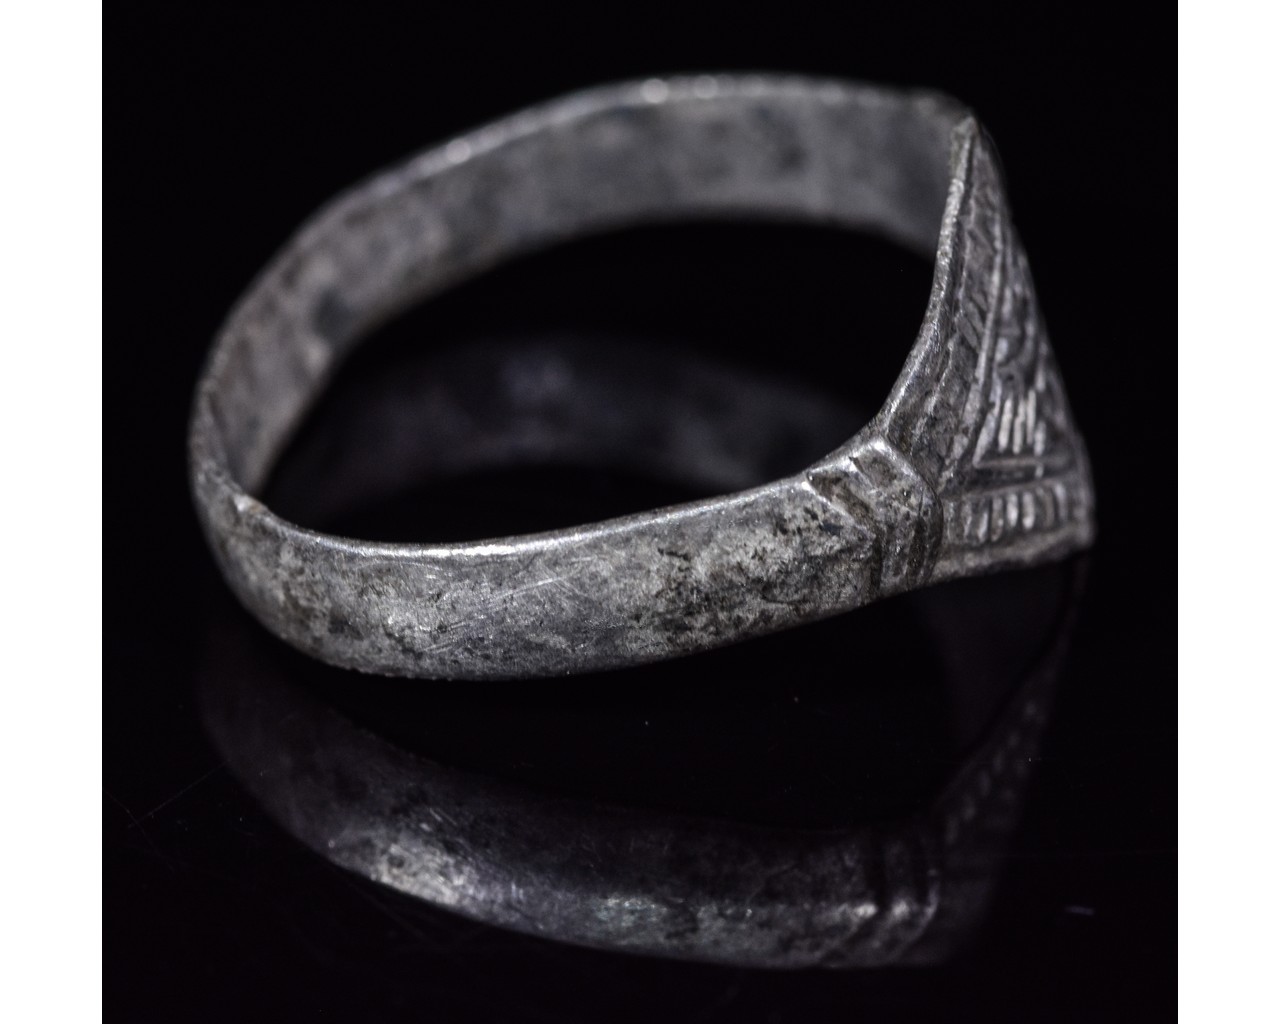 VIKING SILVER RING WITH RUNIC SYMBOLS - Image 4 of 4